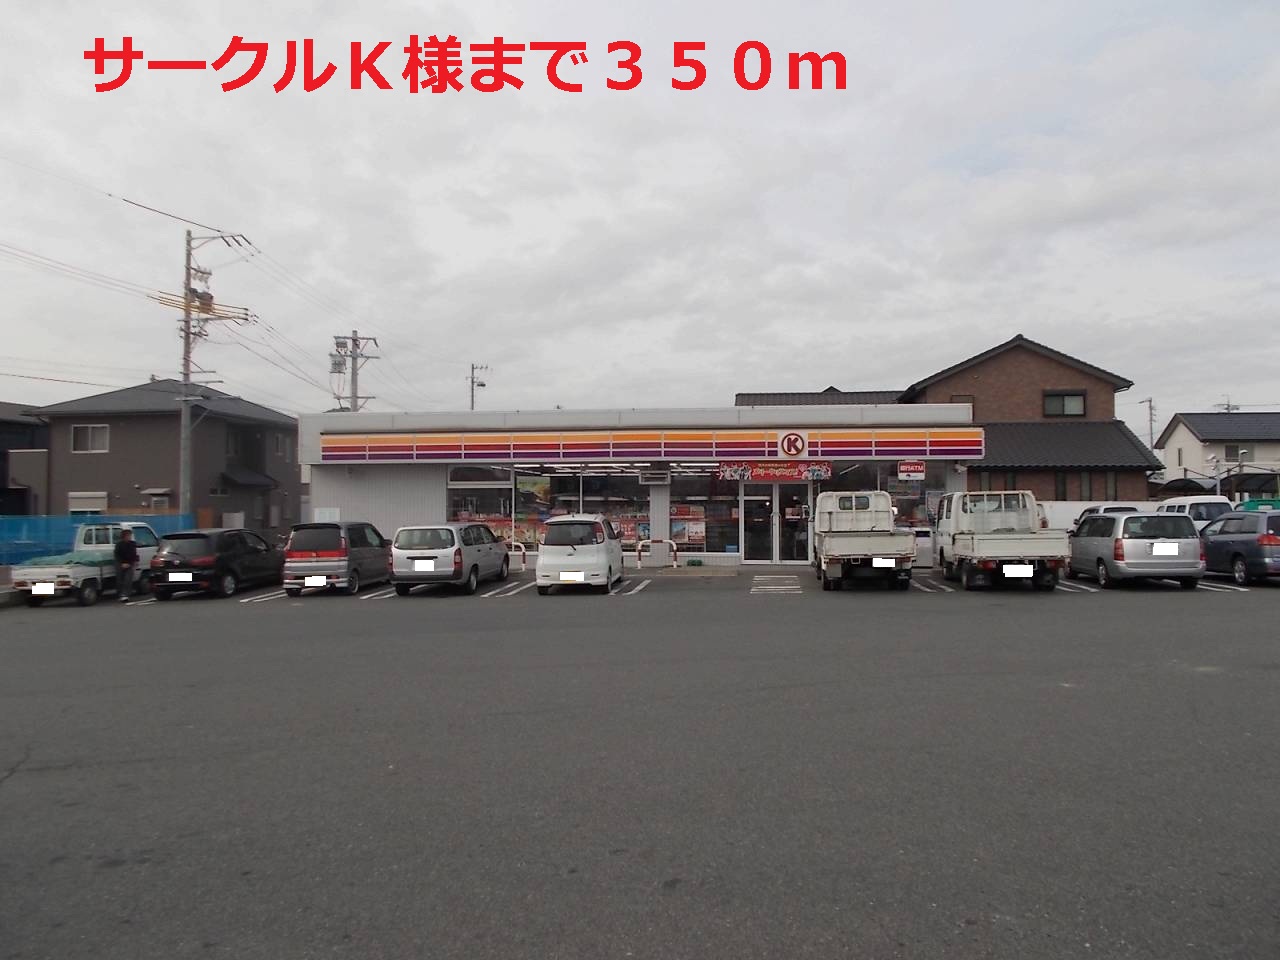 Convenience store. Circle 350m to K (convenience store)